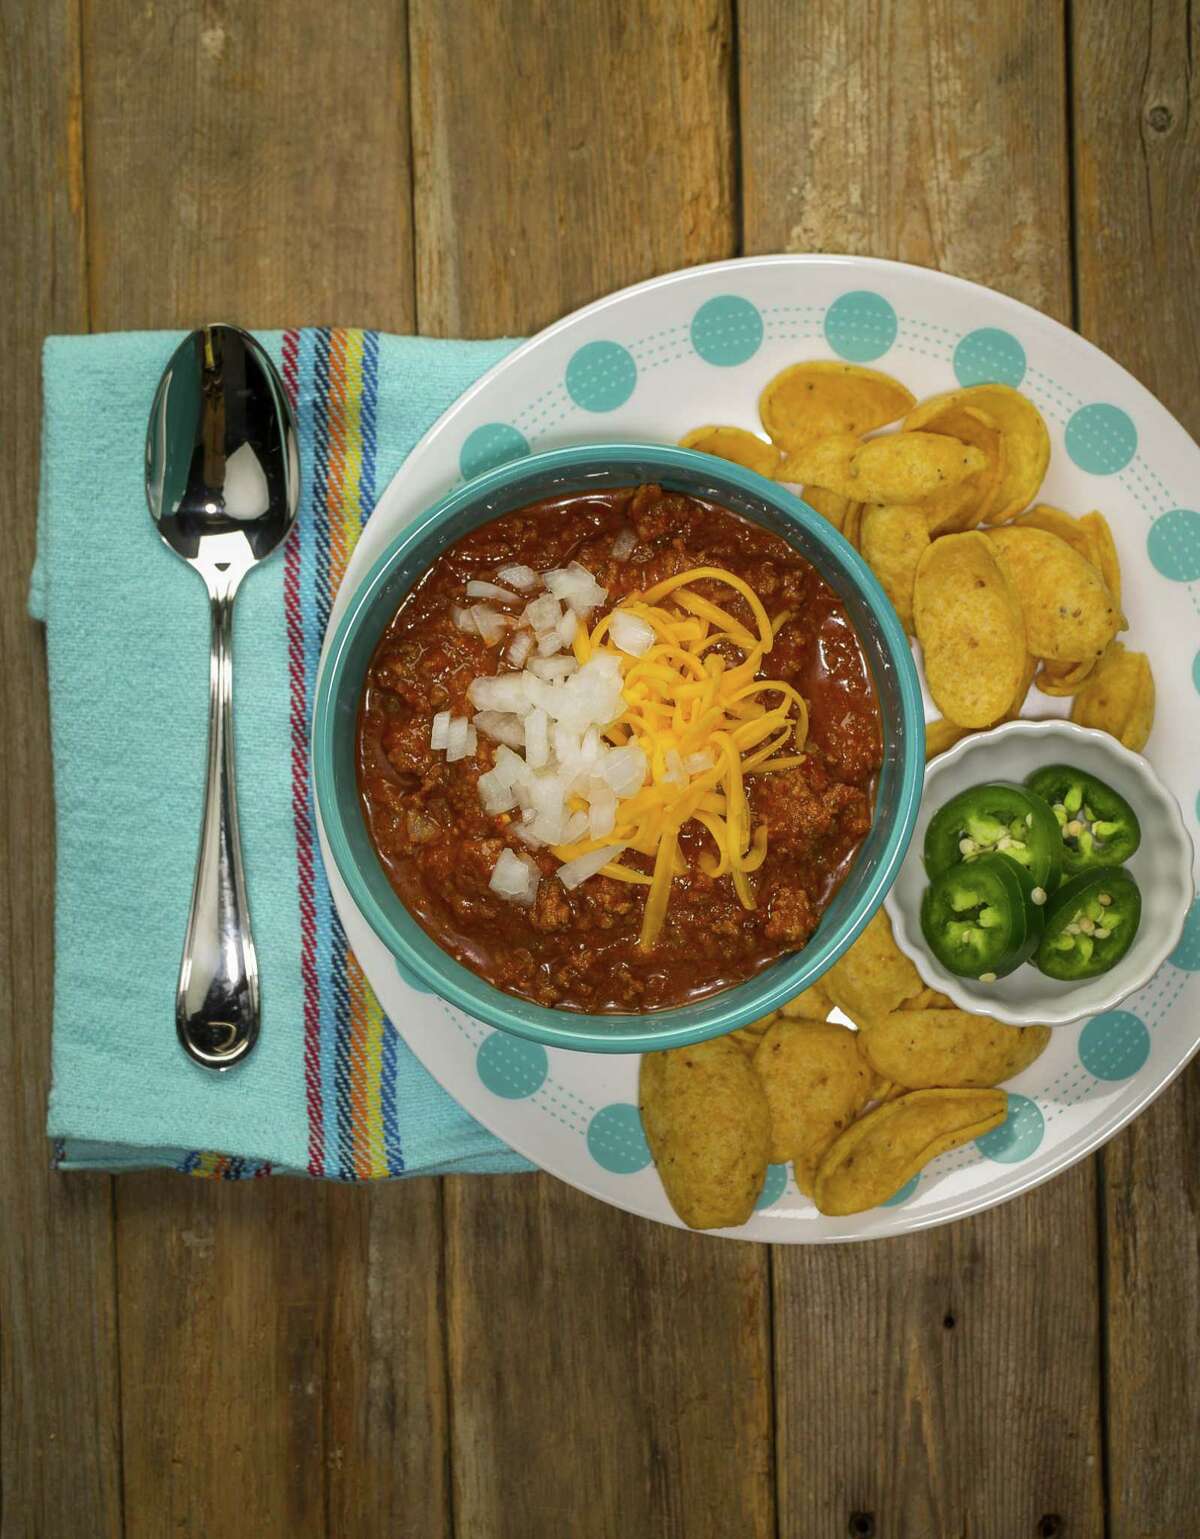 Texas Chile Con Carne adapted from a recipe by former food editor and cookbook author Dotty Griffith is made using coarsely ground sirloin and a dried chile paste.